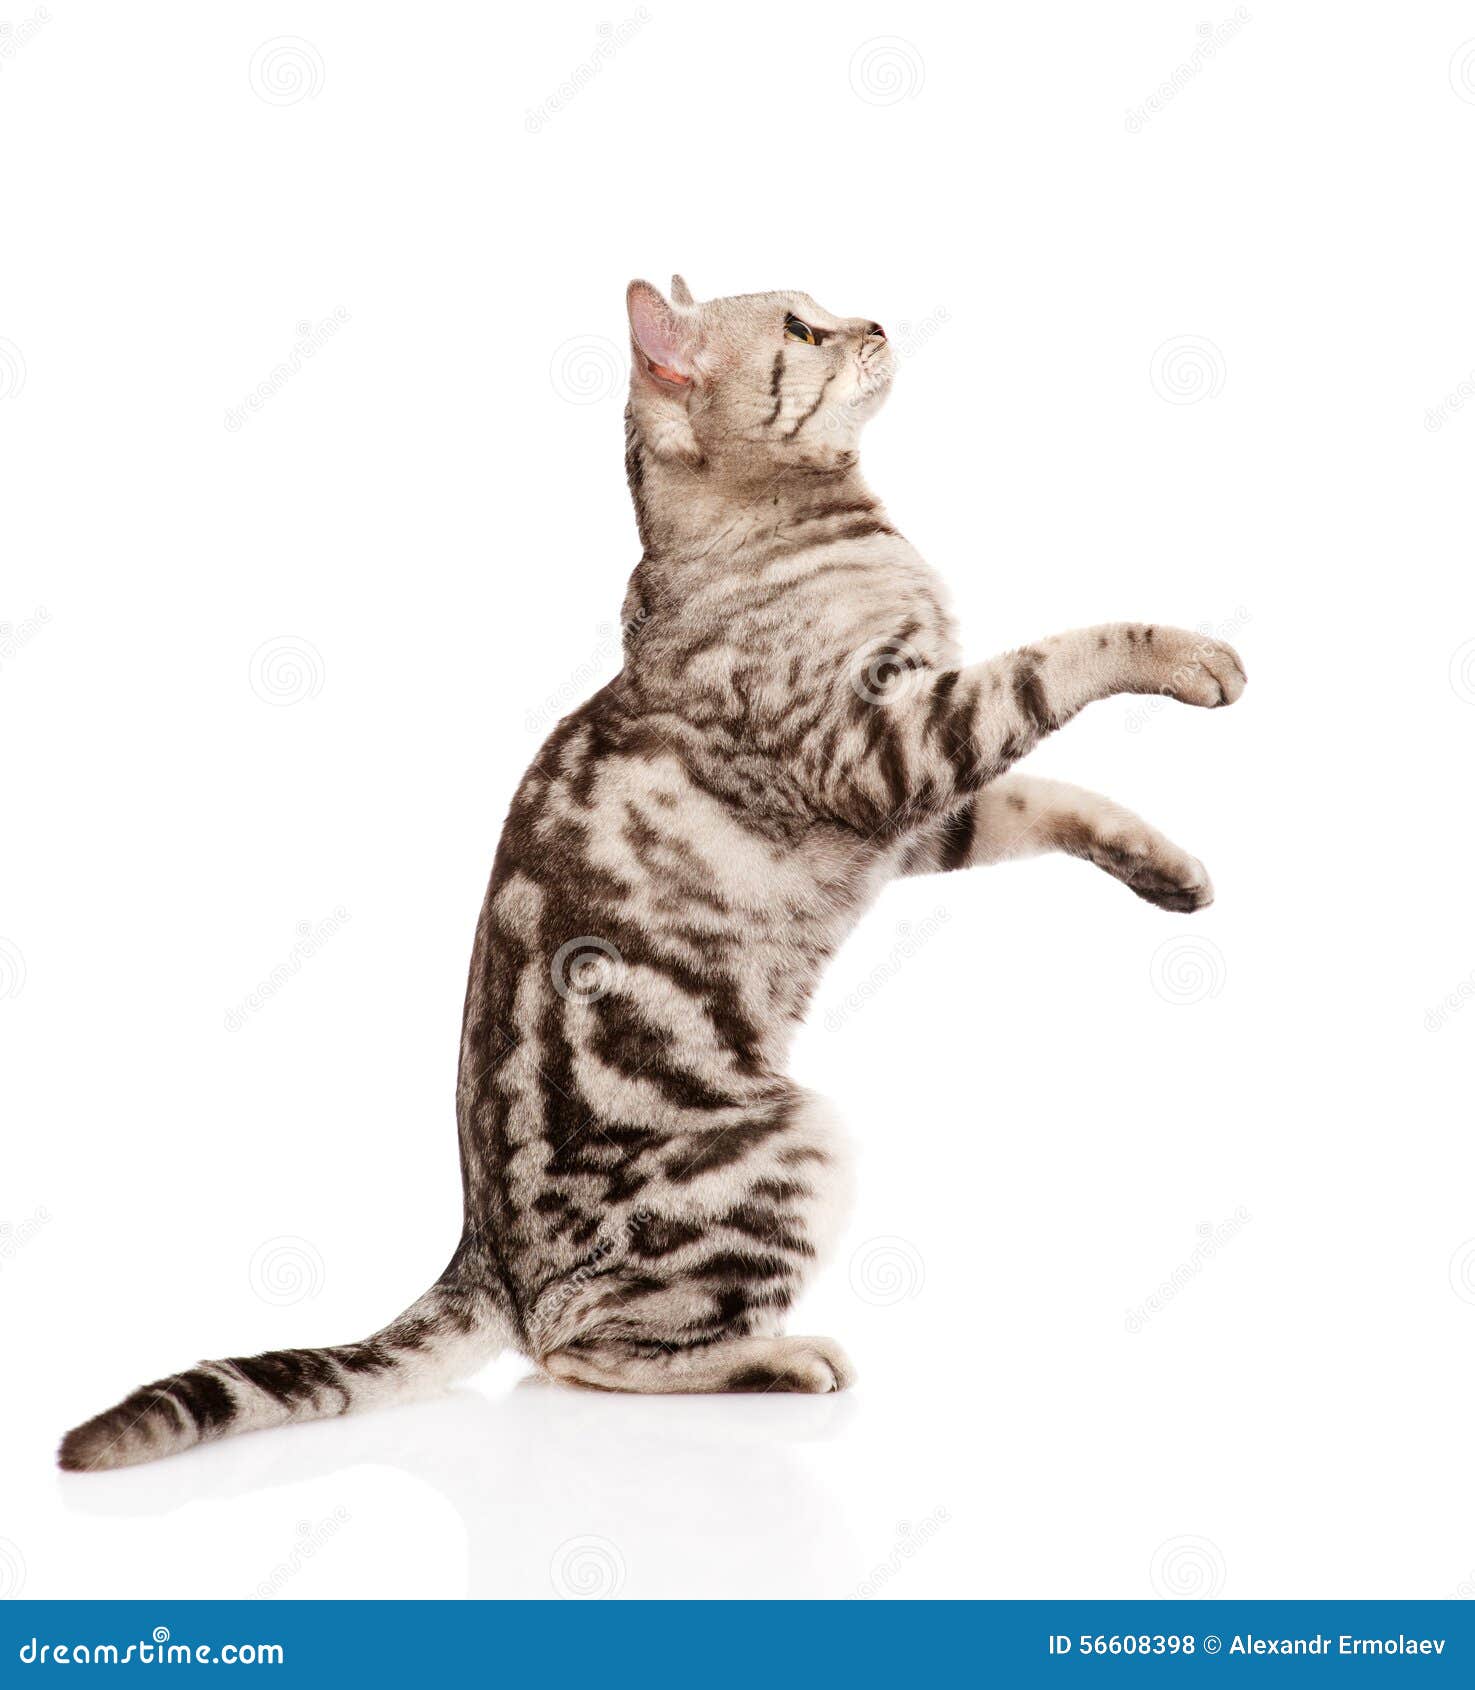 16 908 Cat Profile Photos Free Royalty Free Stock Photos From Dreamstime